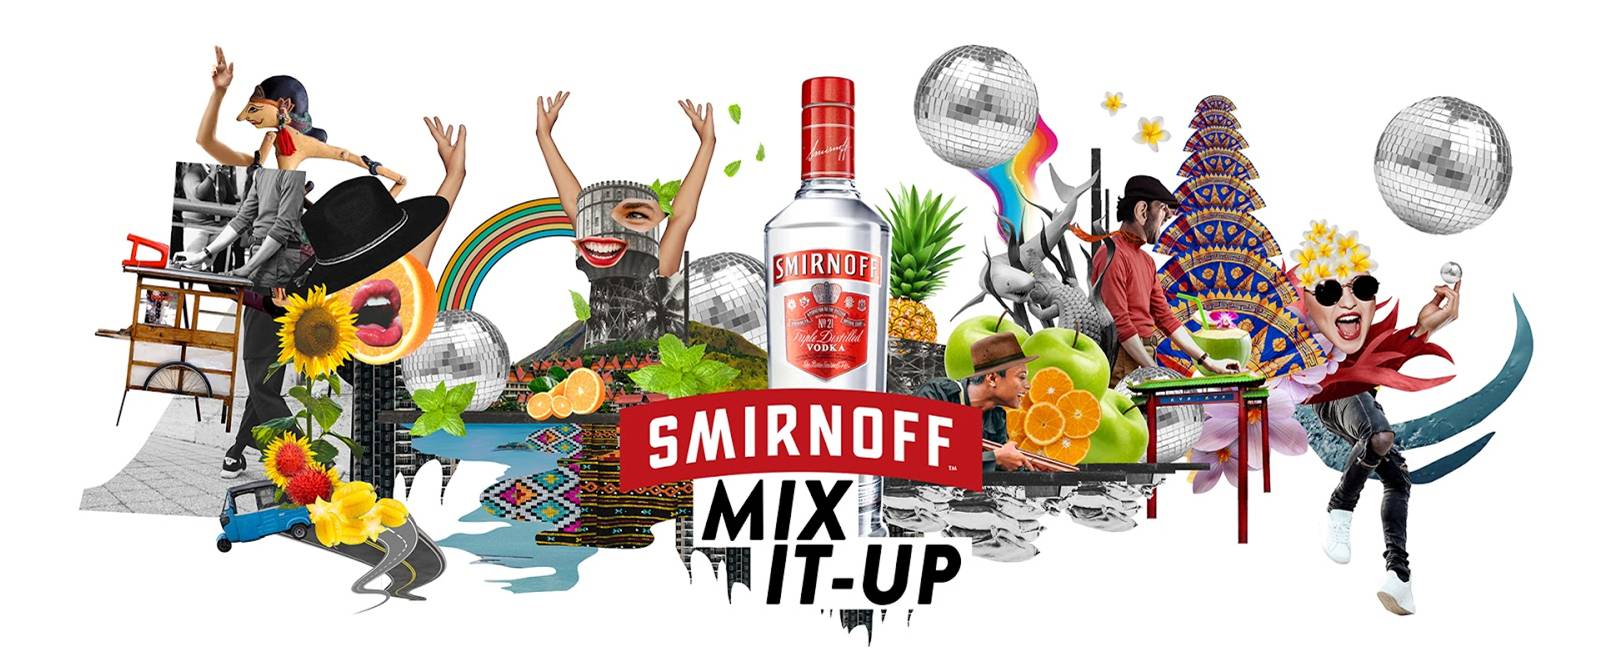 Smirnoff Revs Up Nocturnal Vibes With Locally Inspired Drinks And Edm Beats In Jakarta photo